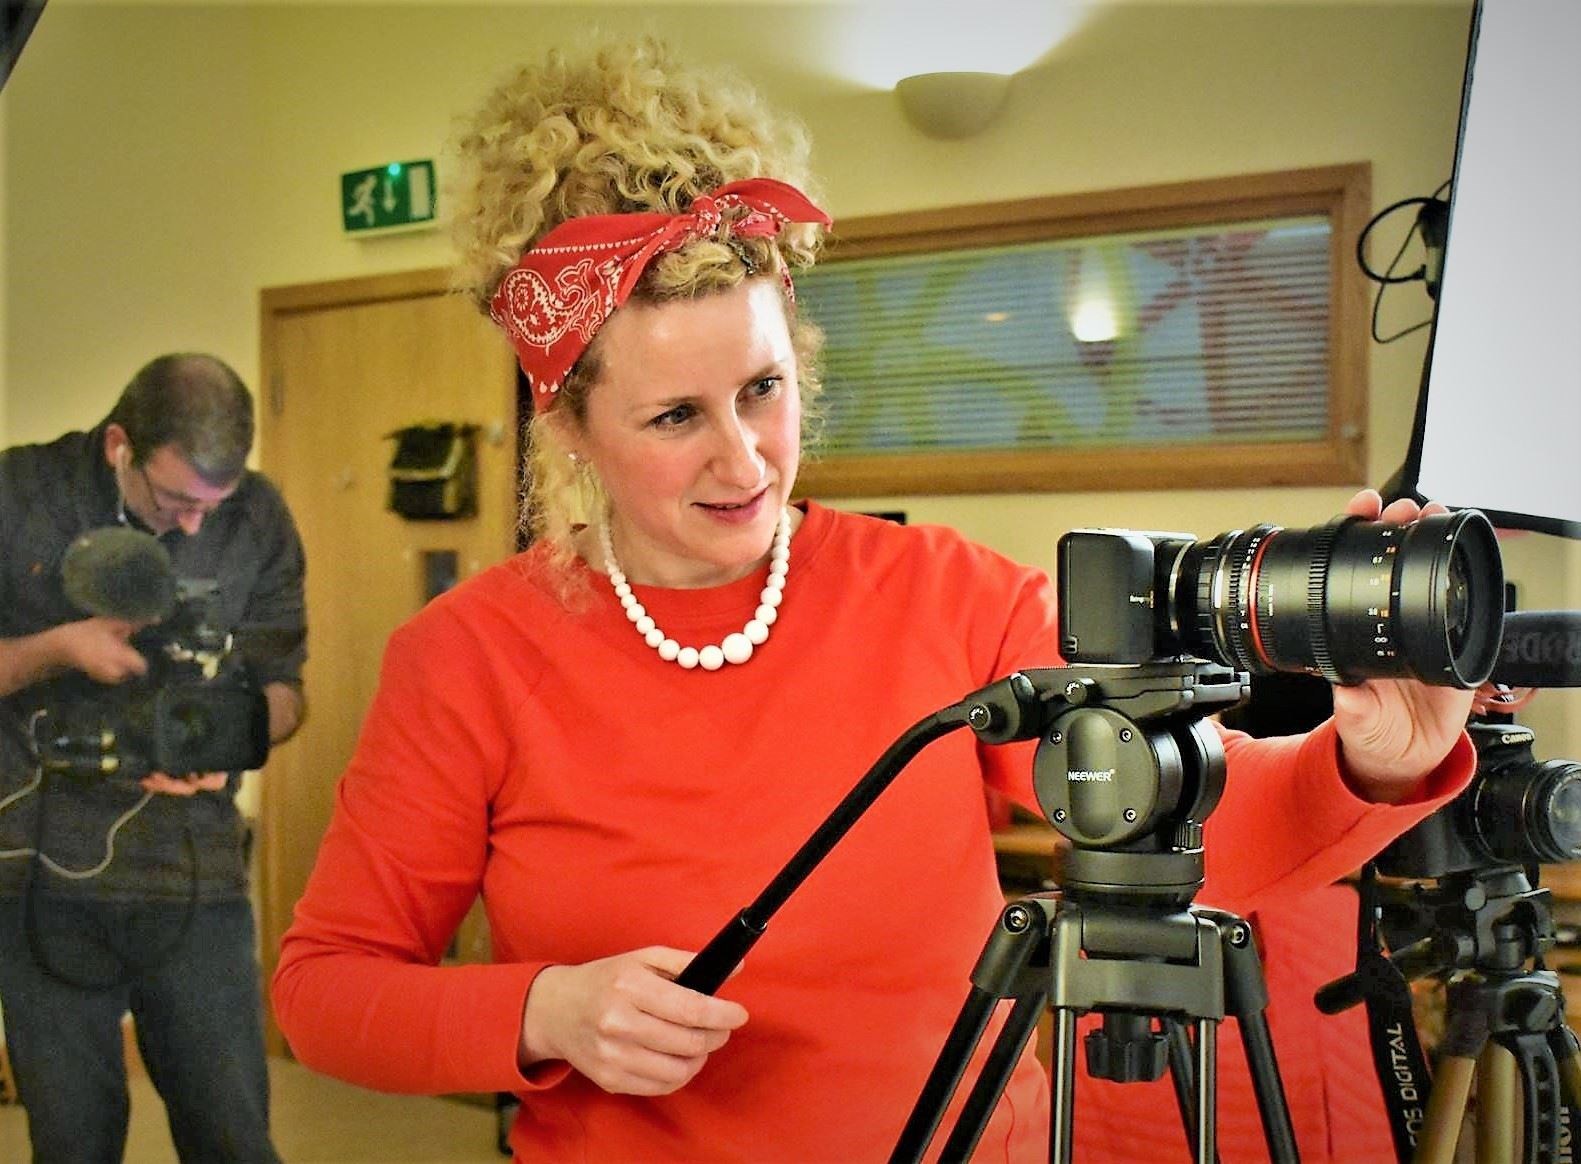 Project manager of the scheme, Wilma Smith, is an established filmmaker in Glasgow and is looking for 'rurally excluded' talent.